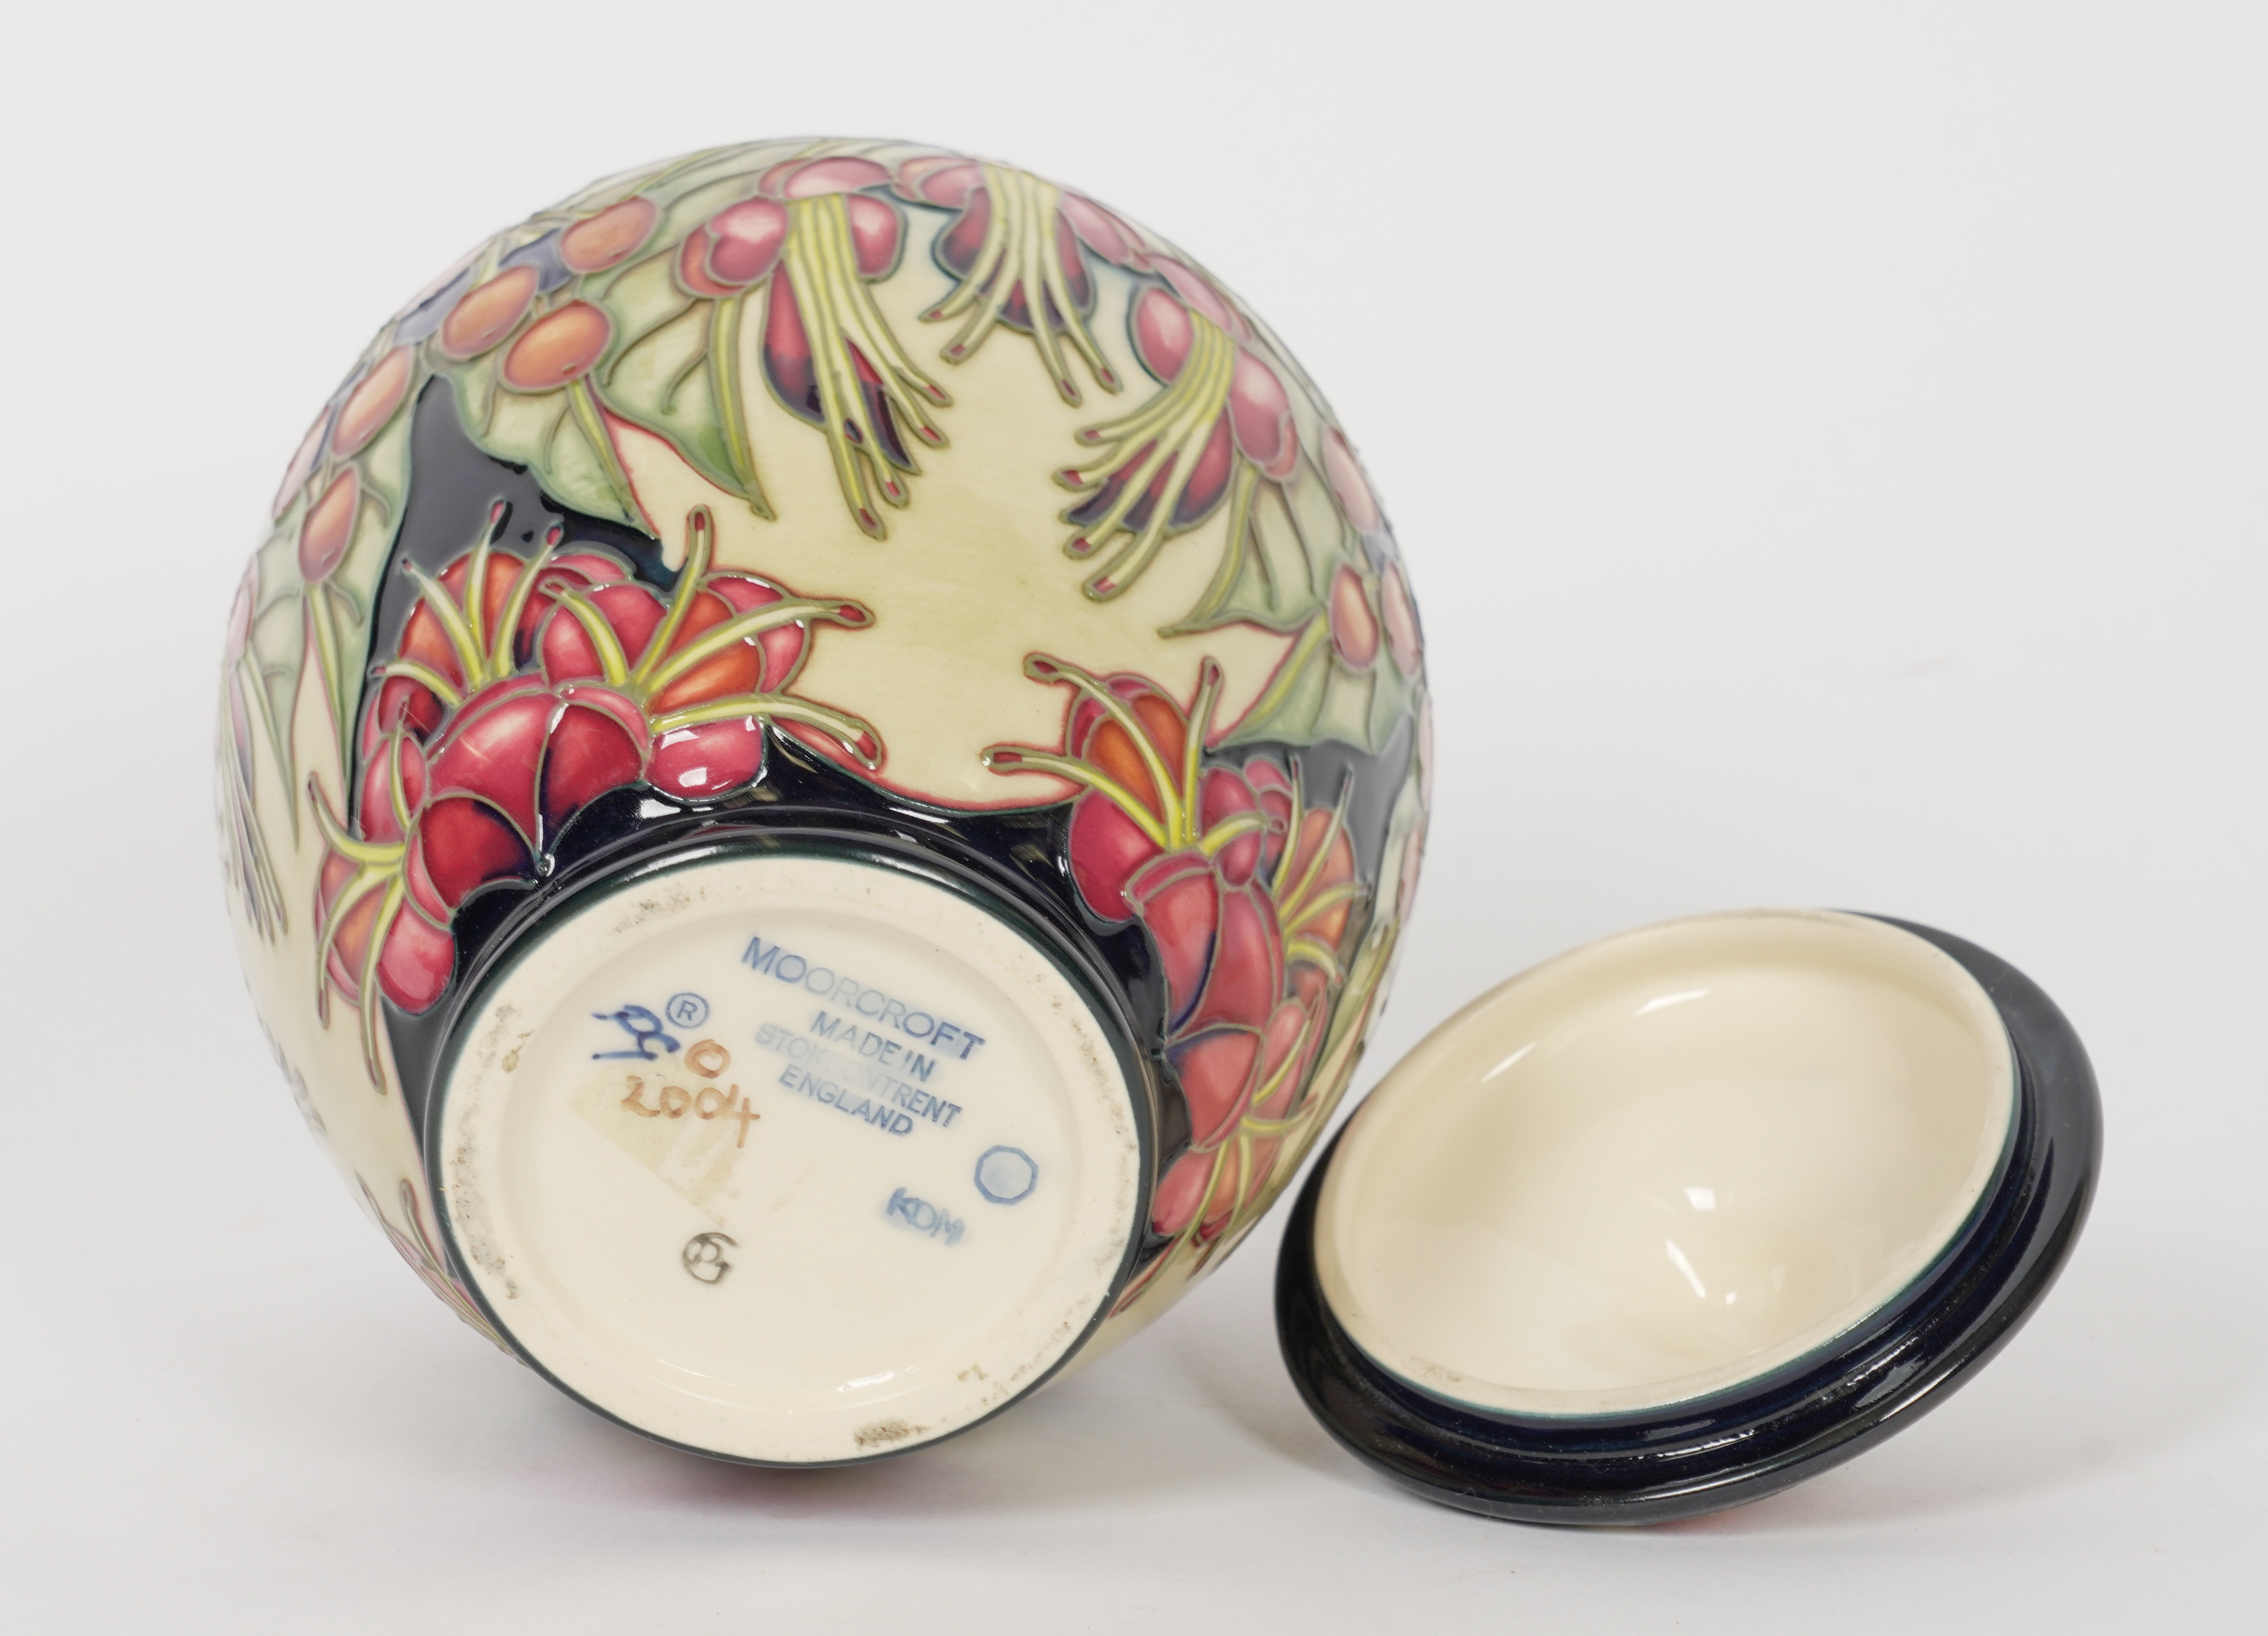 A MOORCROFT OVOID JAR AND COVER BY PHILIP GIBSON - Image 4 of 4